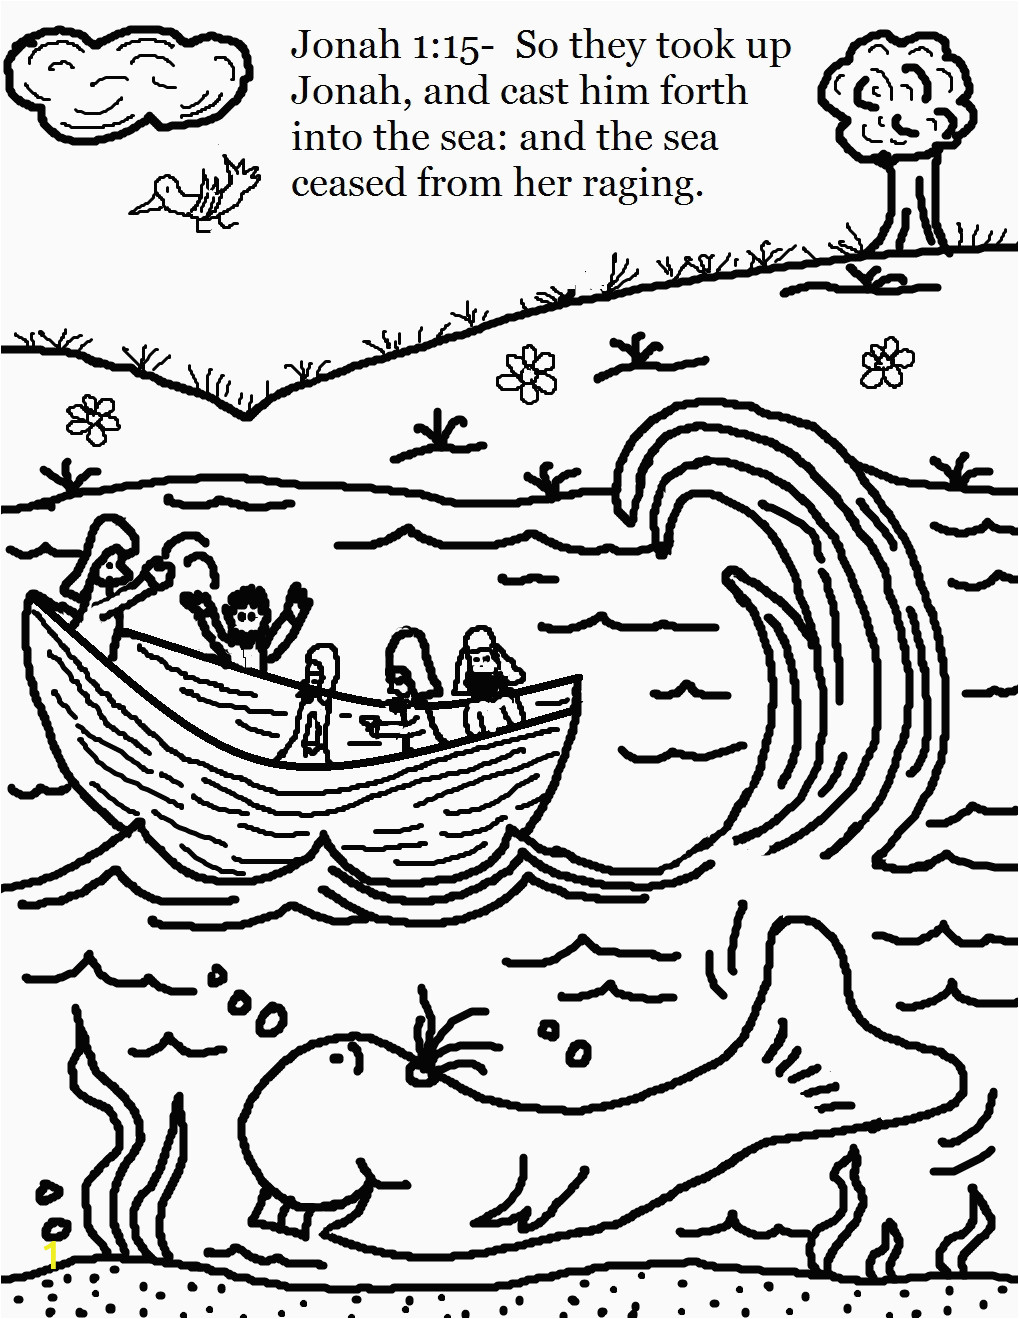 jonah and the whale bible story coloring pages